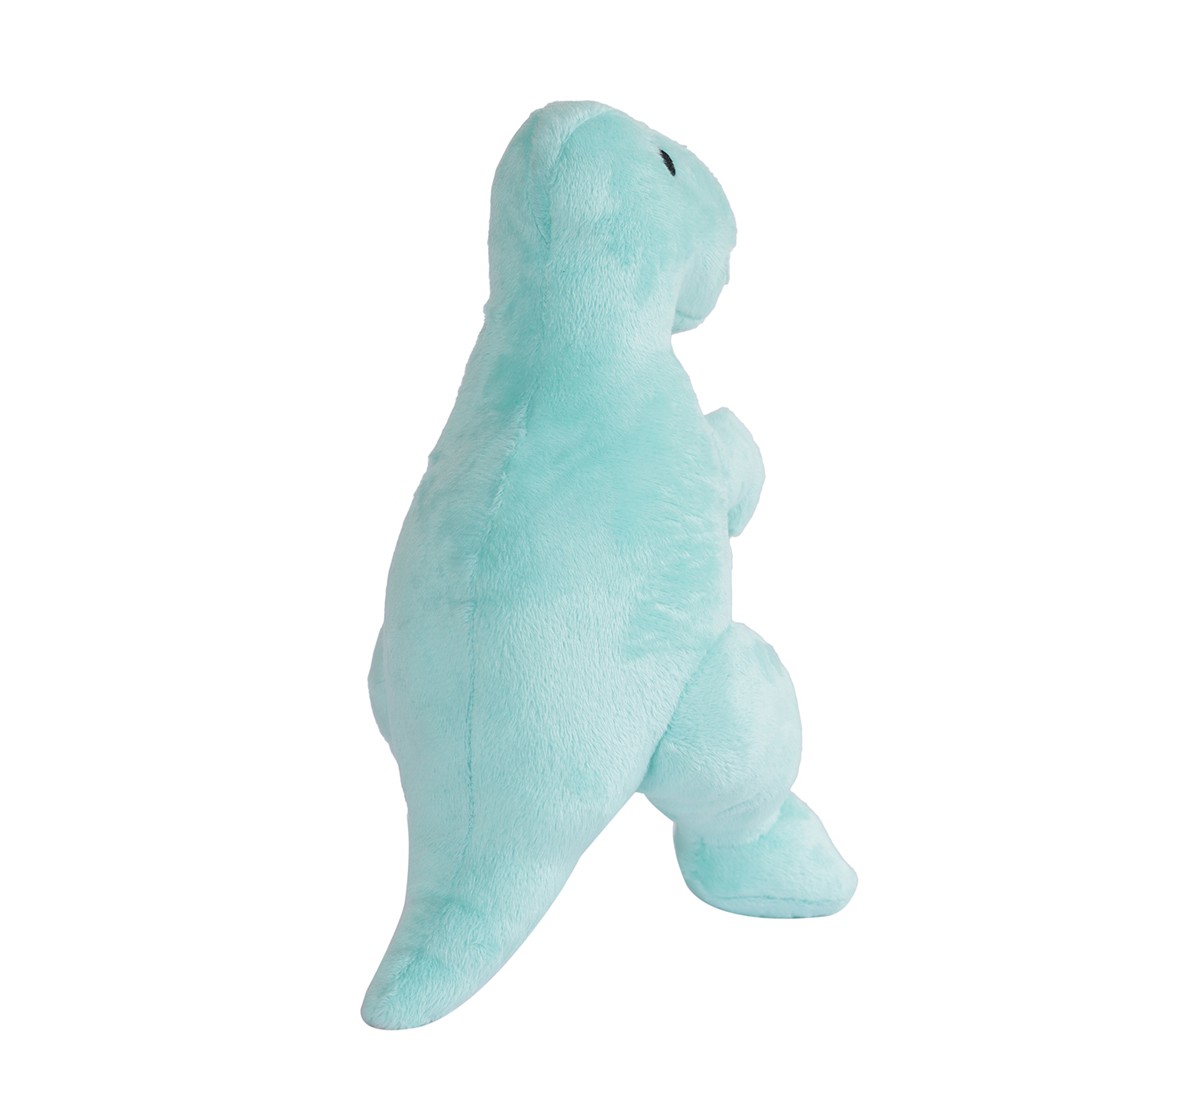 Furrendz Dreamy Dino 10" Plush Green for Kids 1 Year and Above